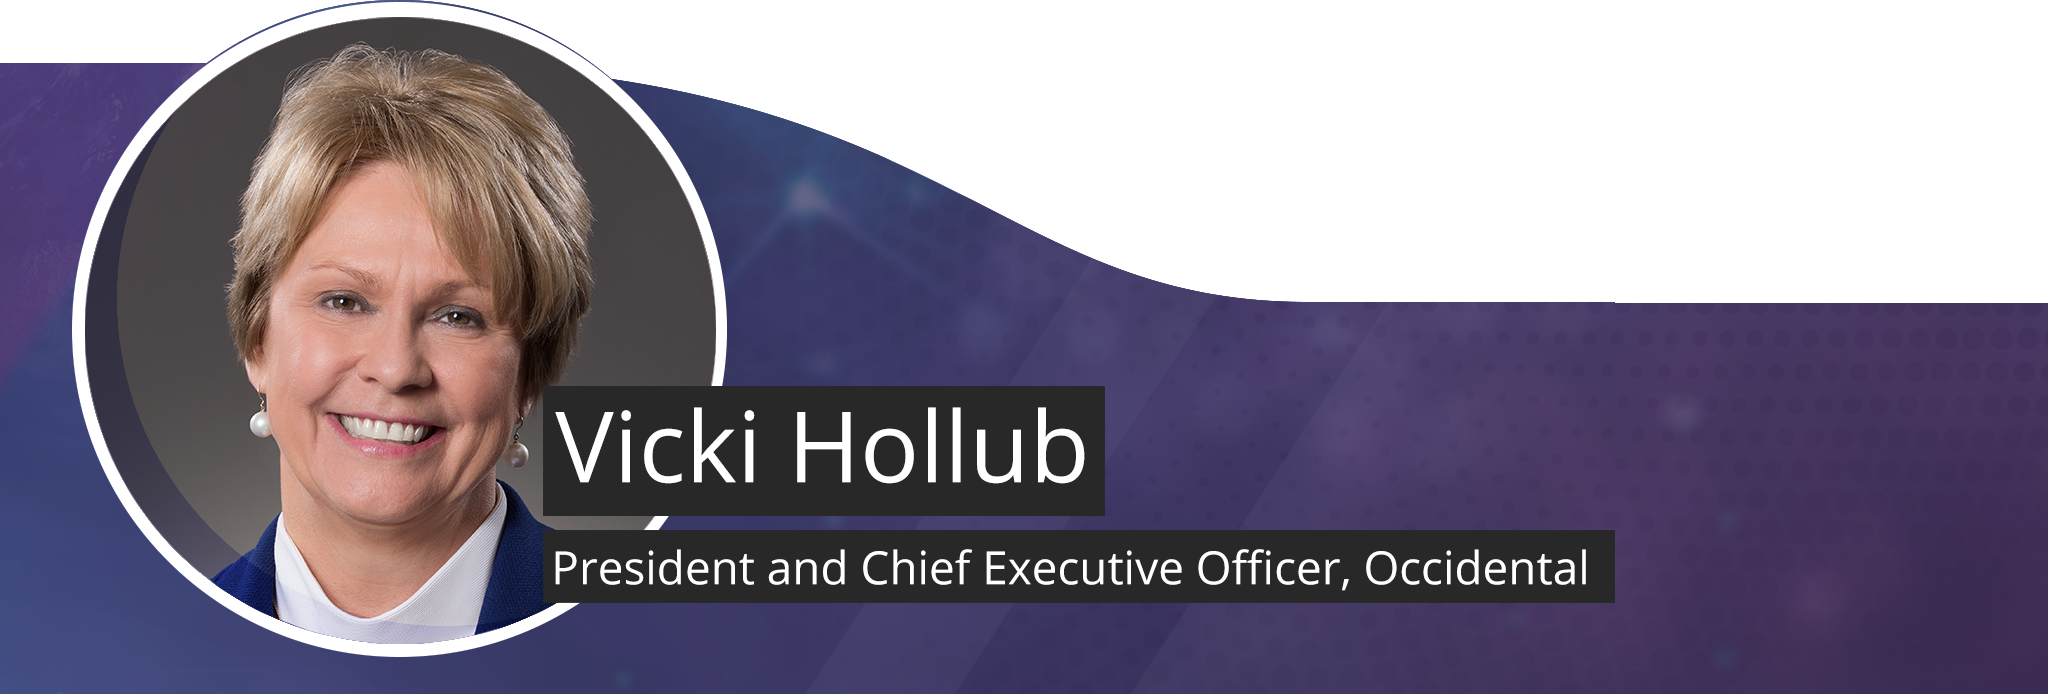 Headshot of Vicki Hollub, President and Chief Executive Officer, Occidental Petroleum